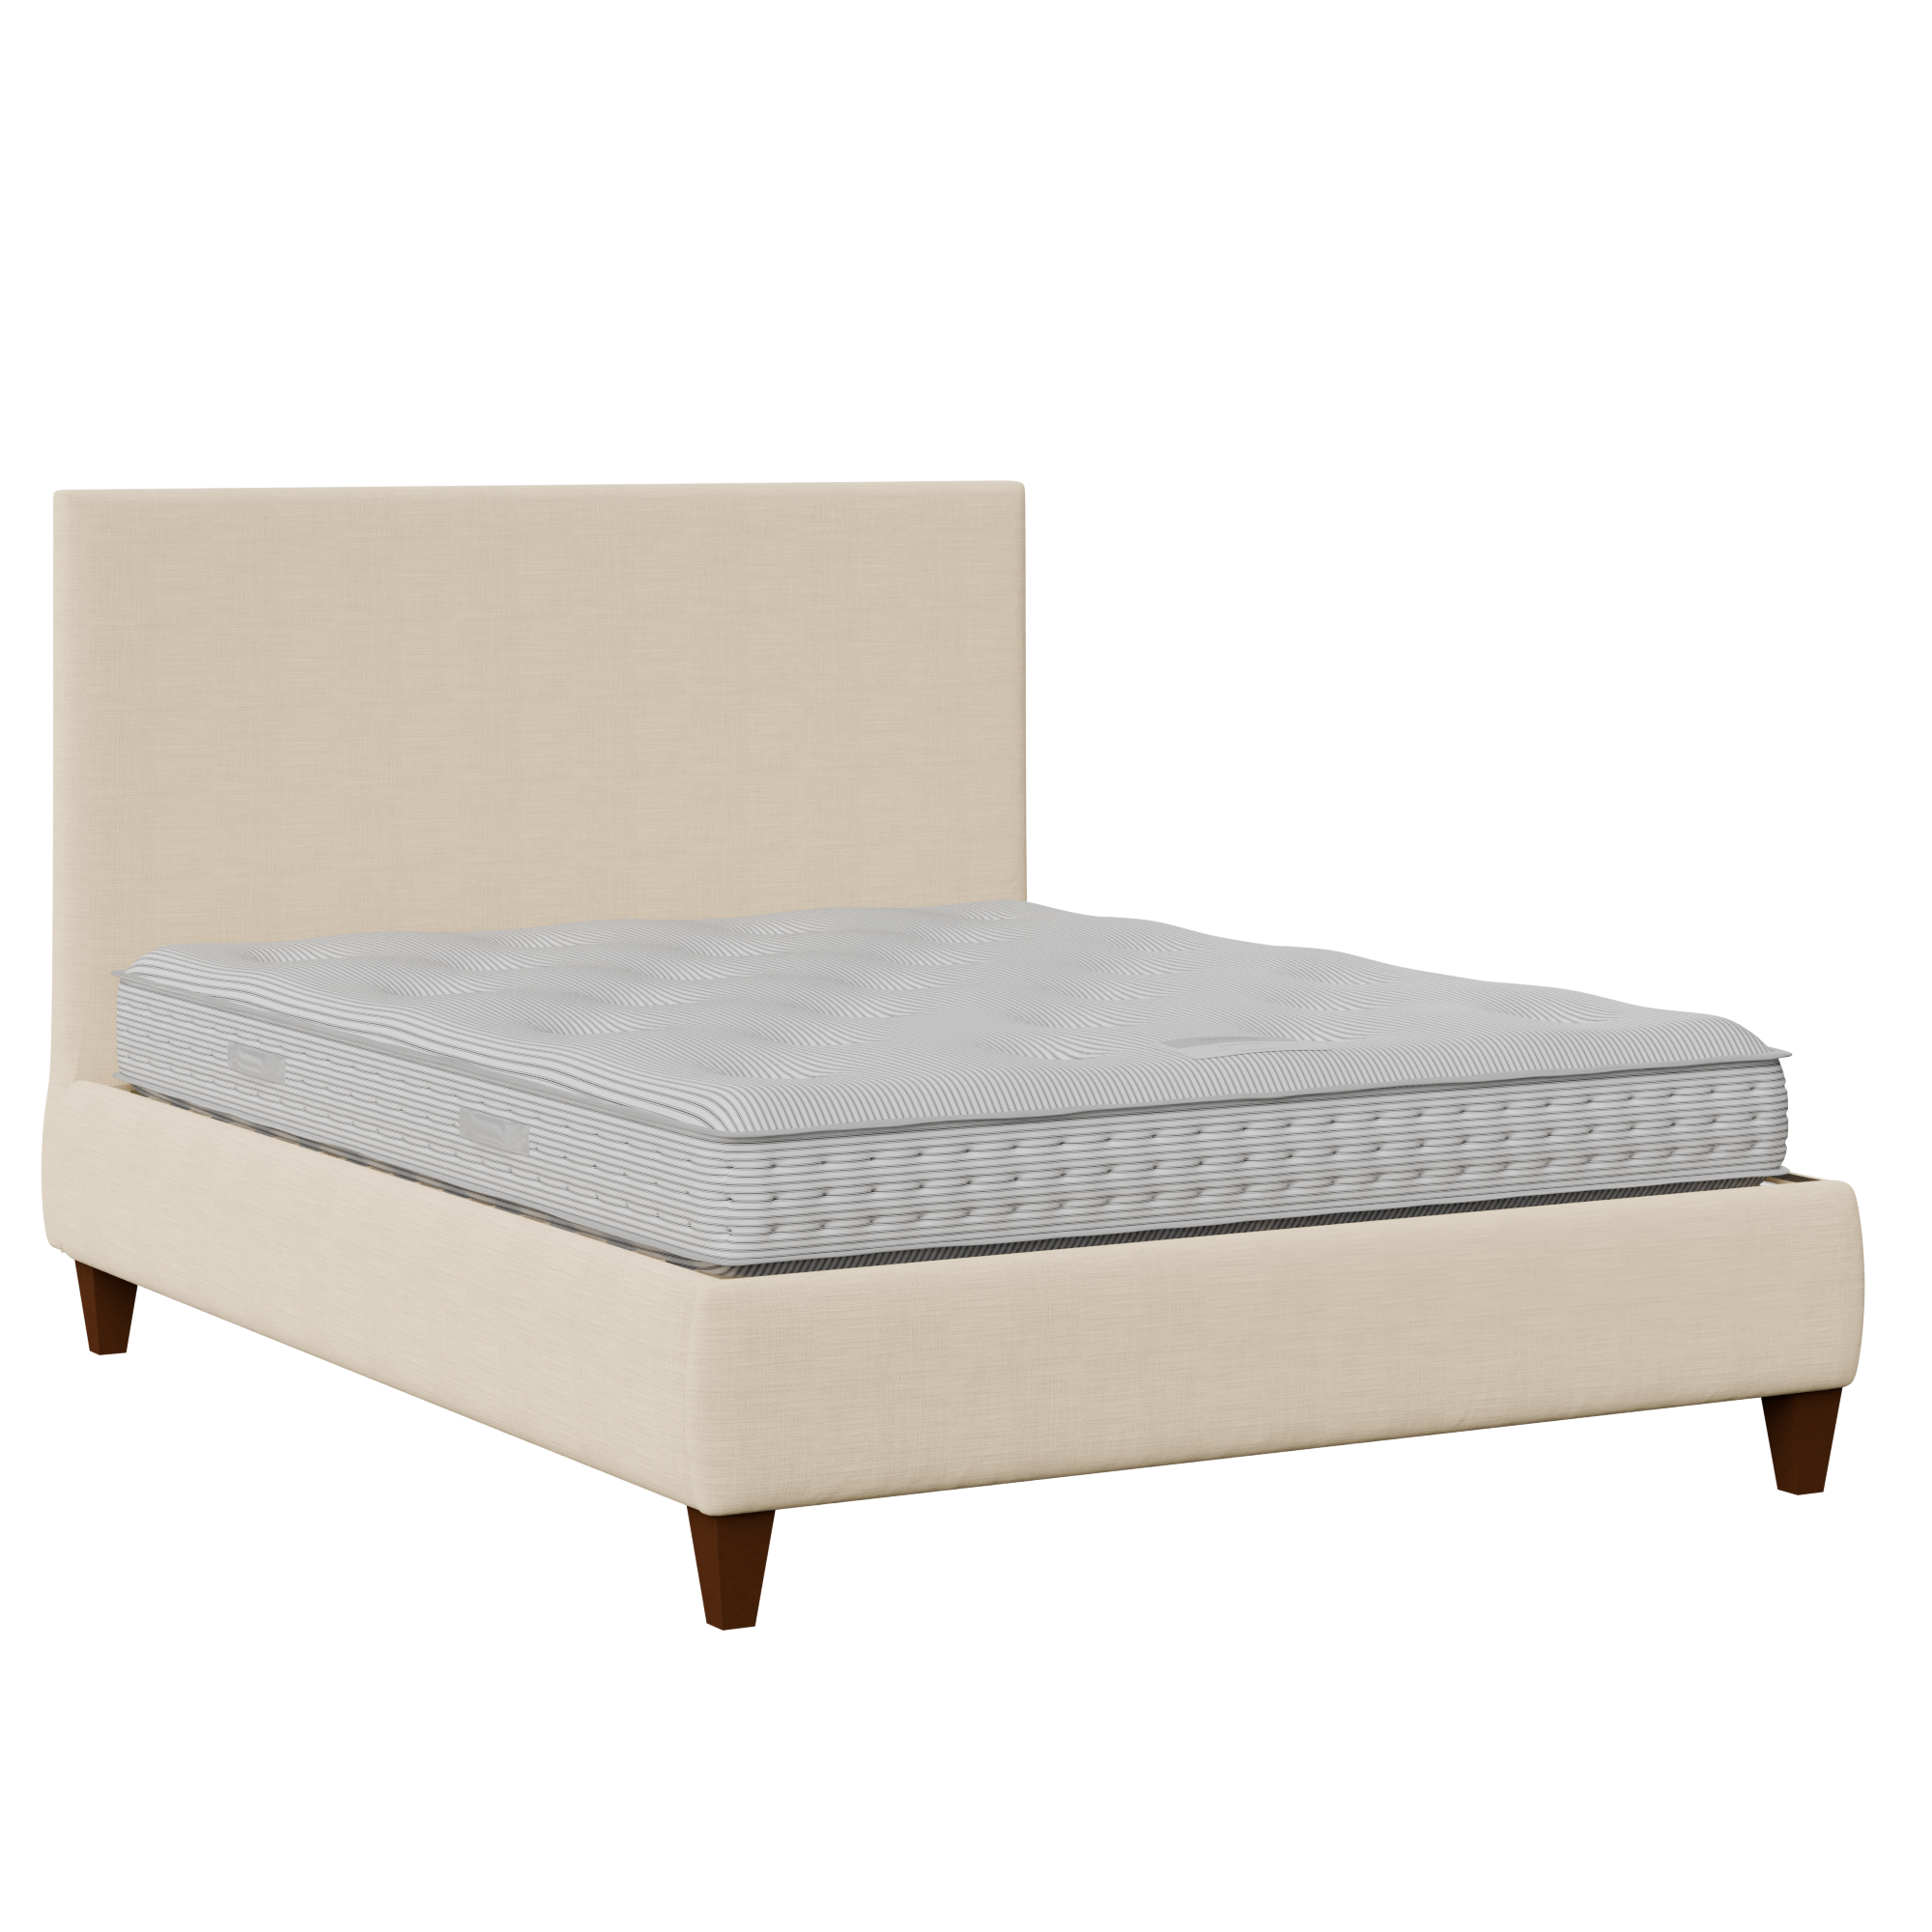 Yushan upholstered bed in natural fabric